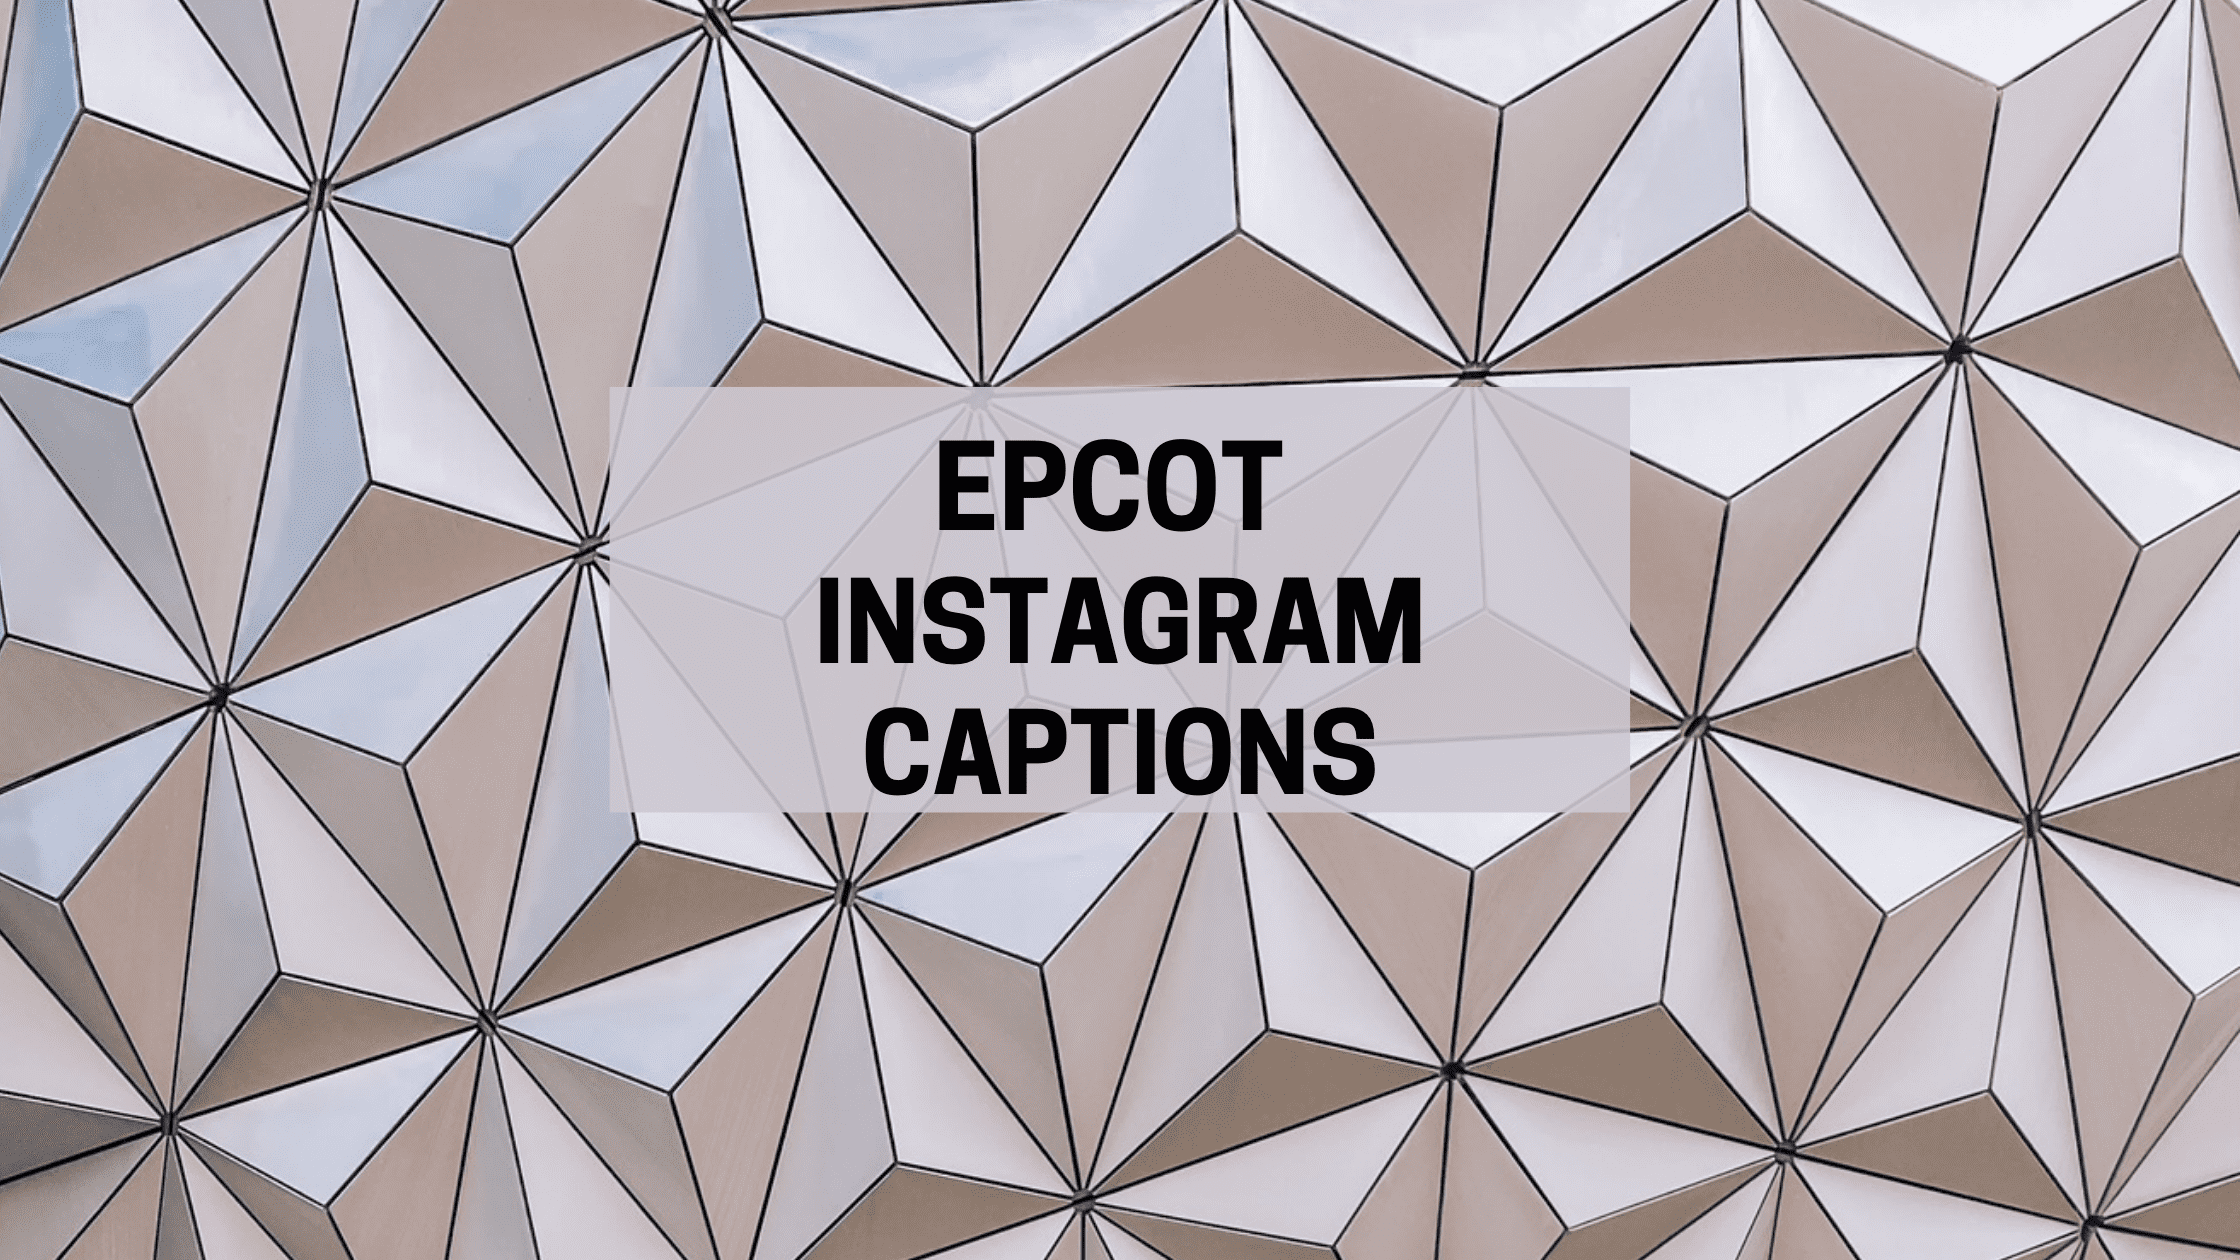 50 Fun And Unique Epcot Instagram Captions for your Trip to Disney! |  Wanderlust With Lisa